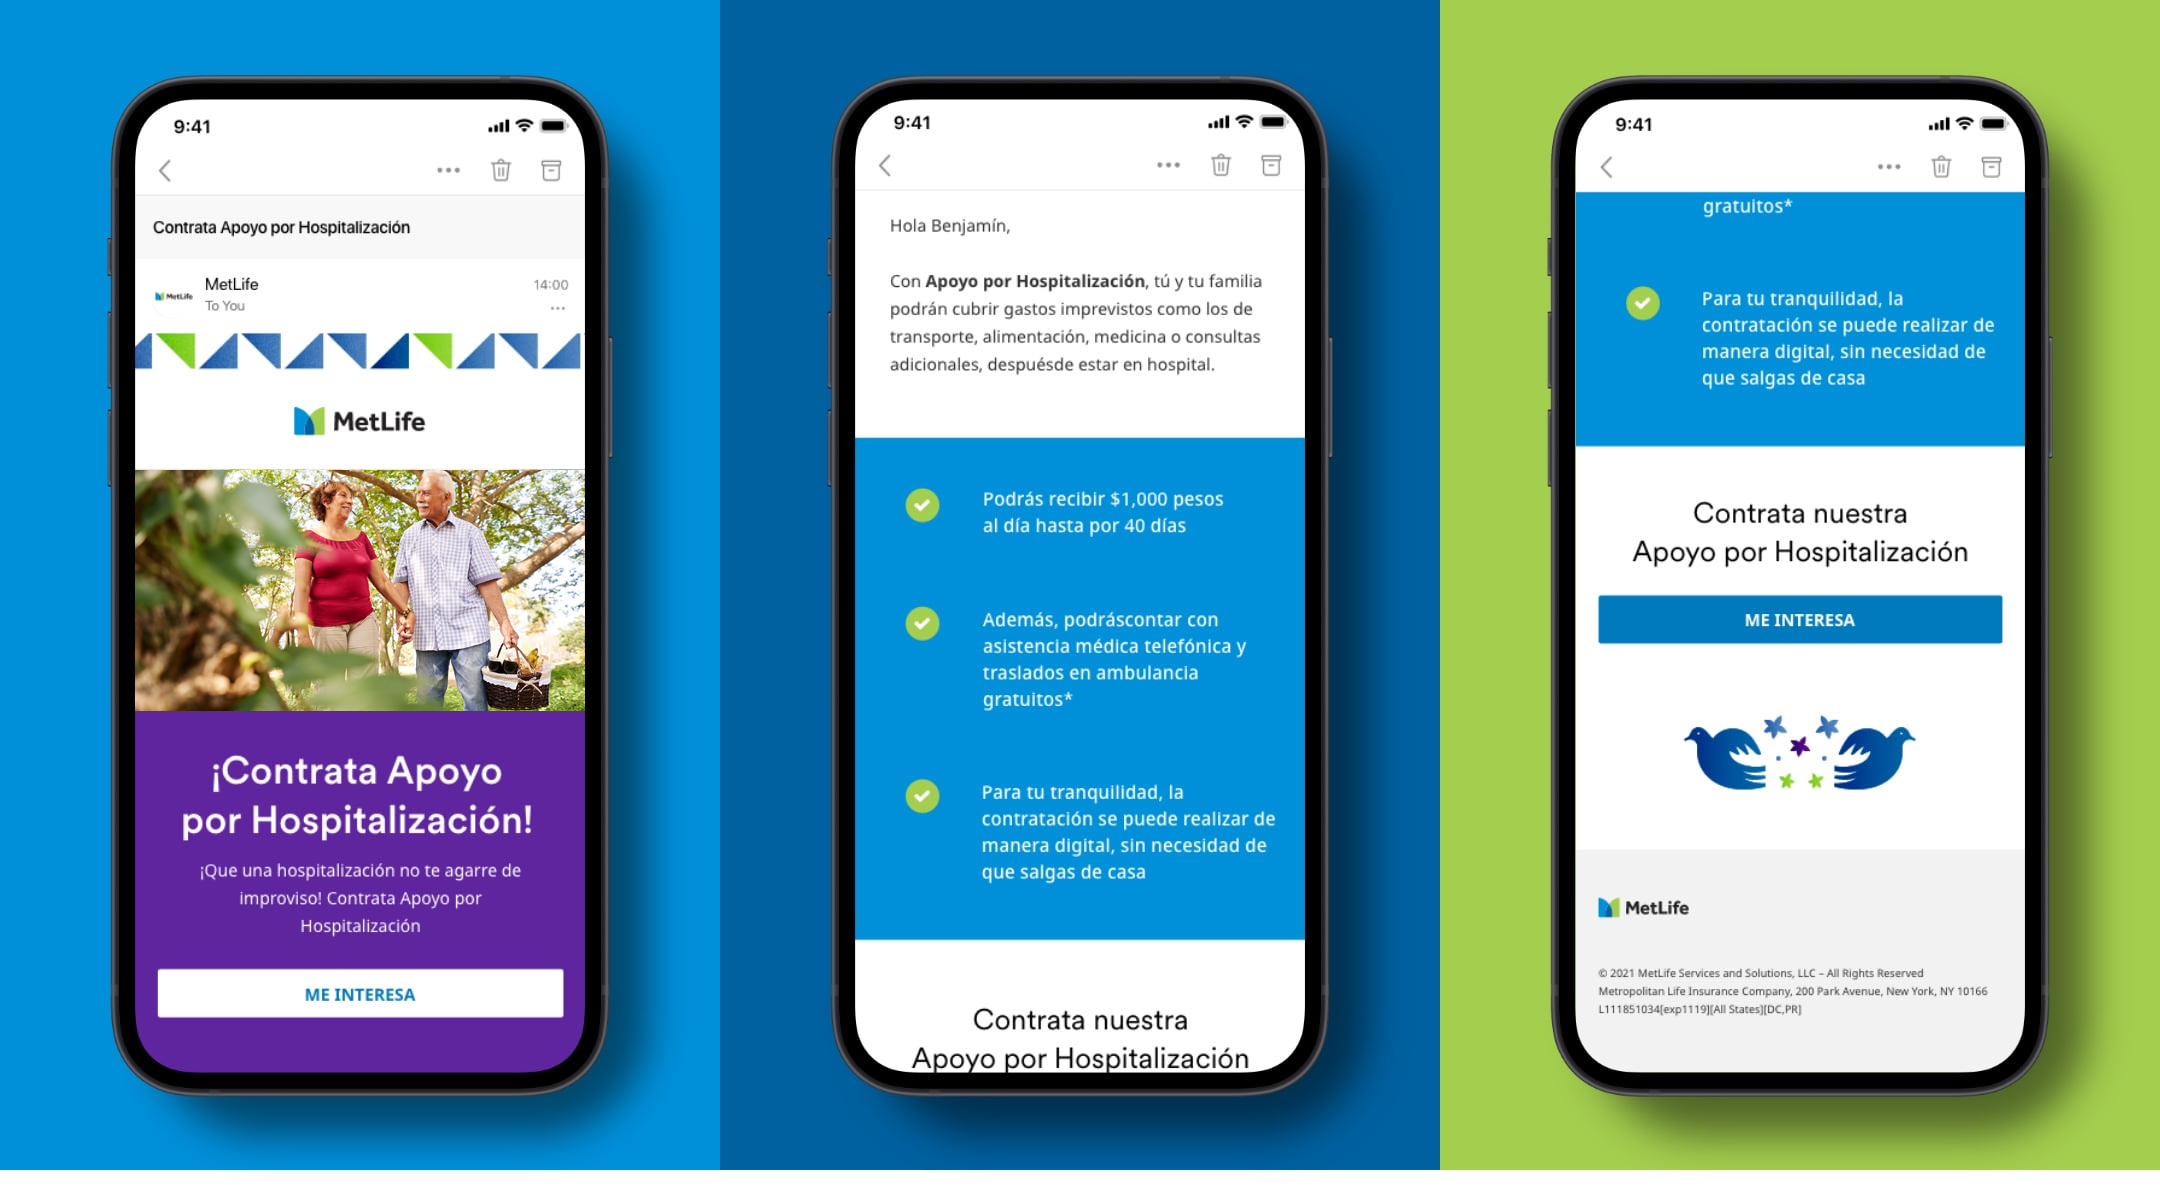 Three phone screens showing color and photography in email design.